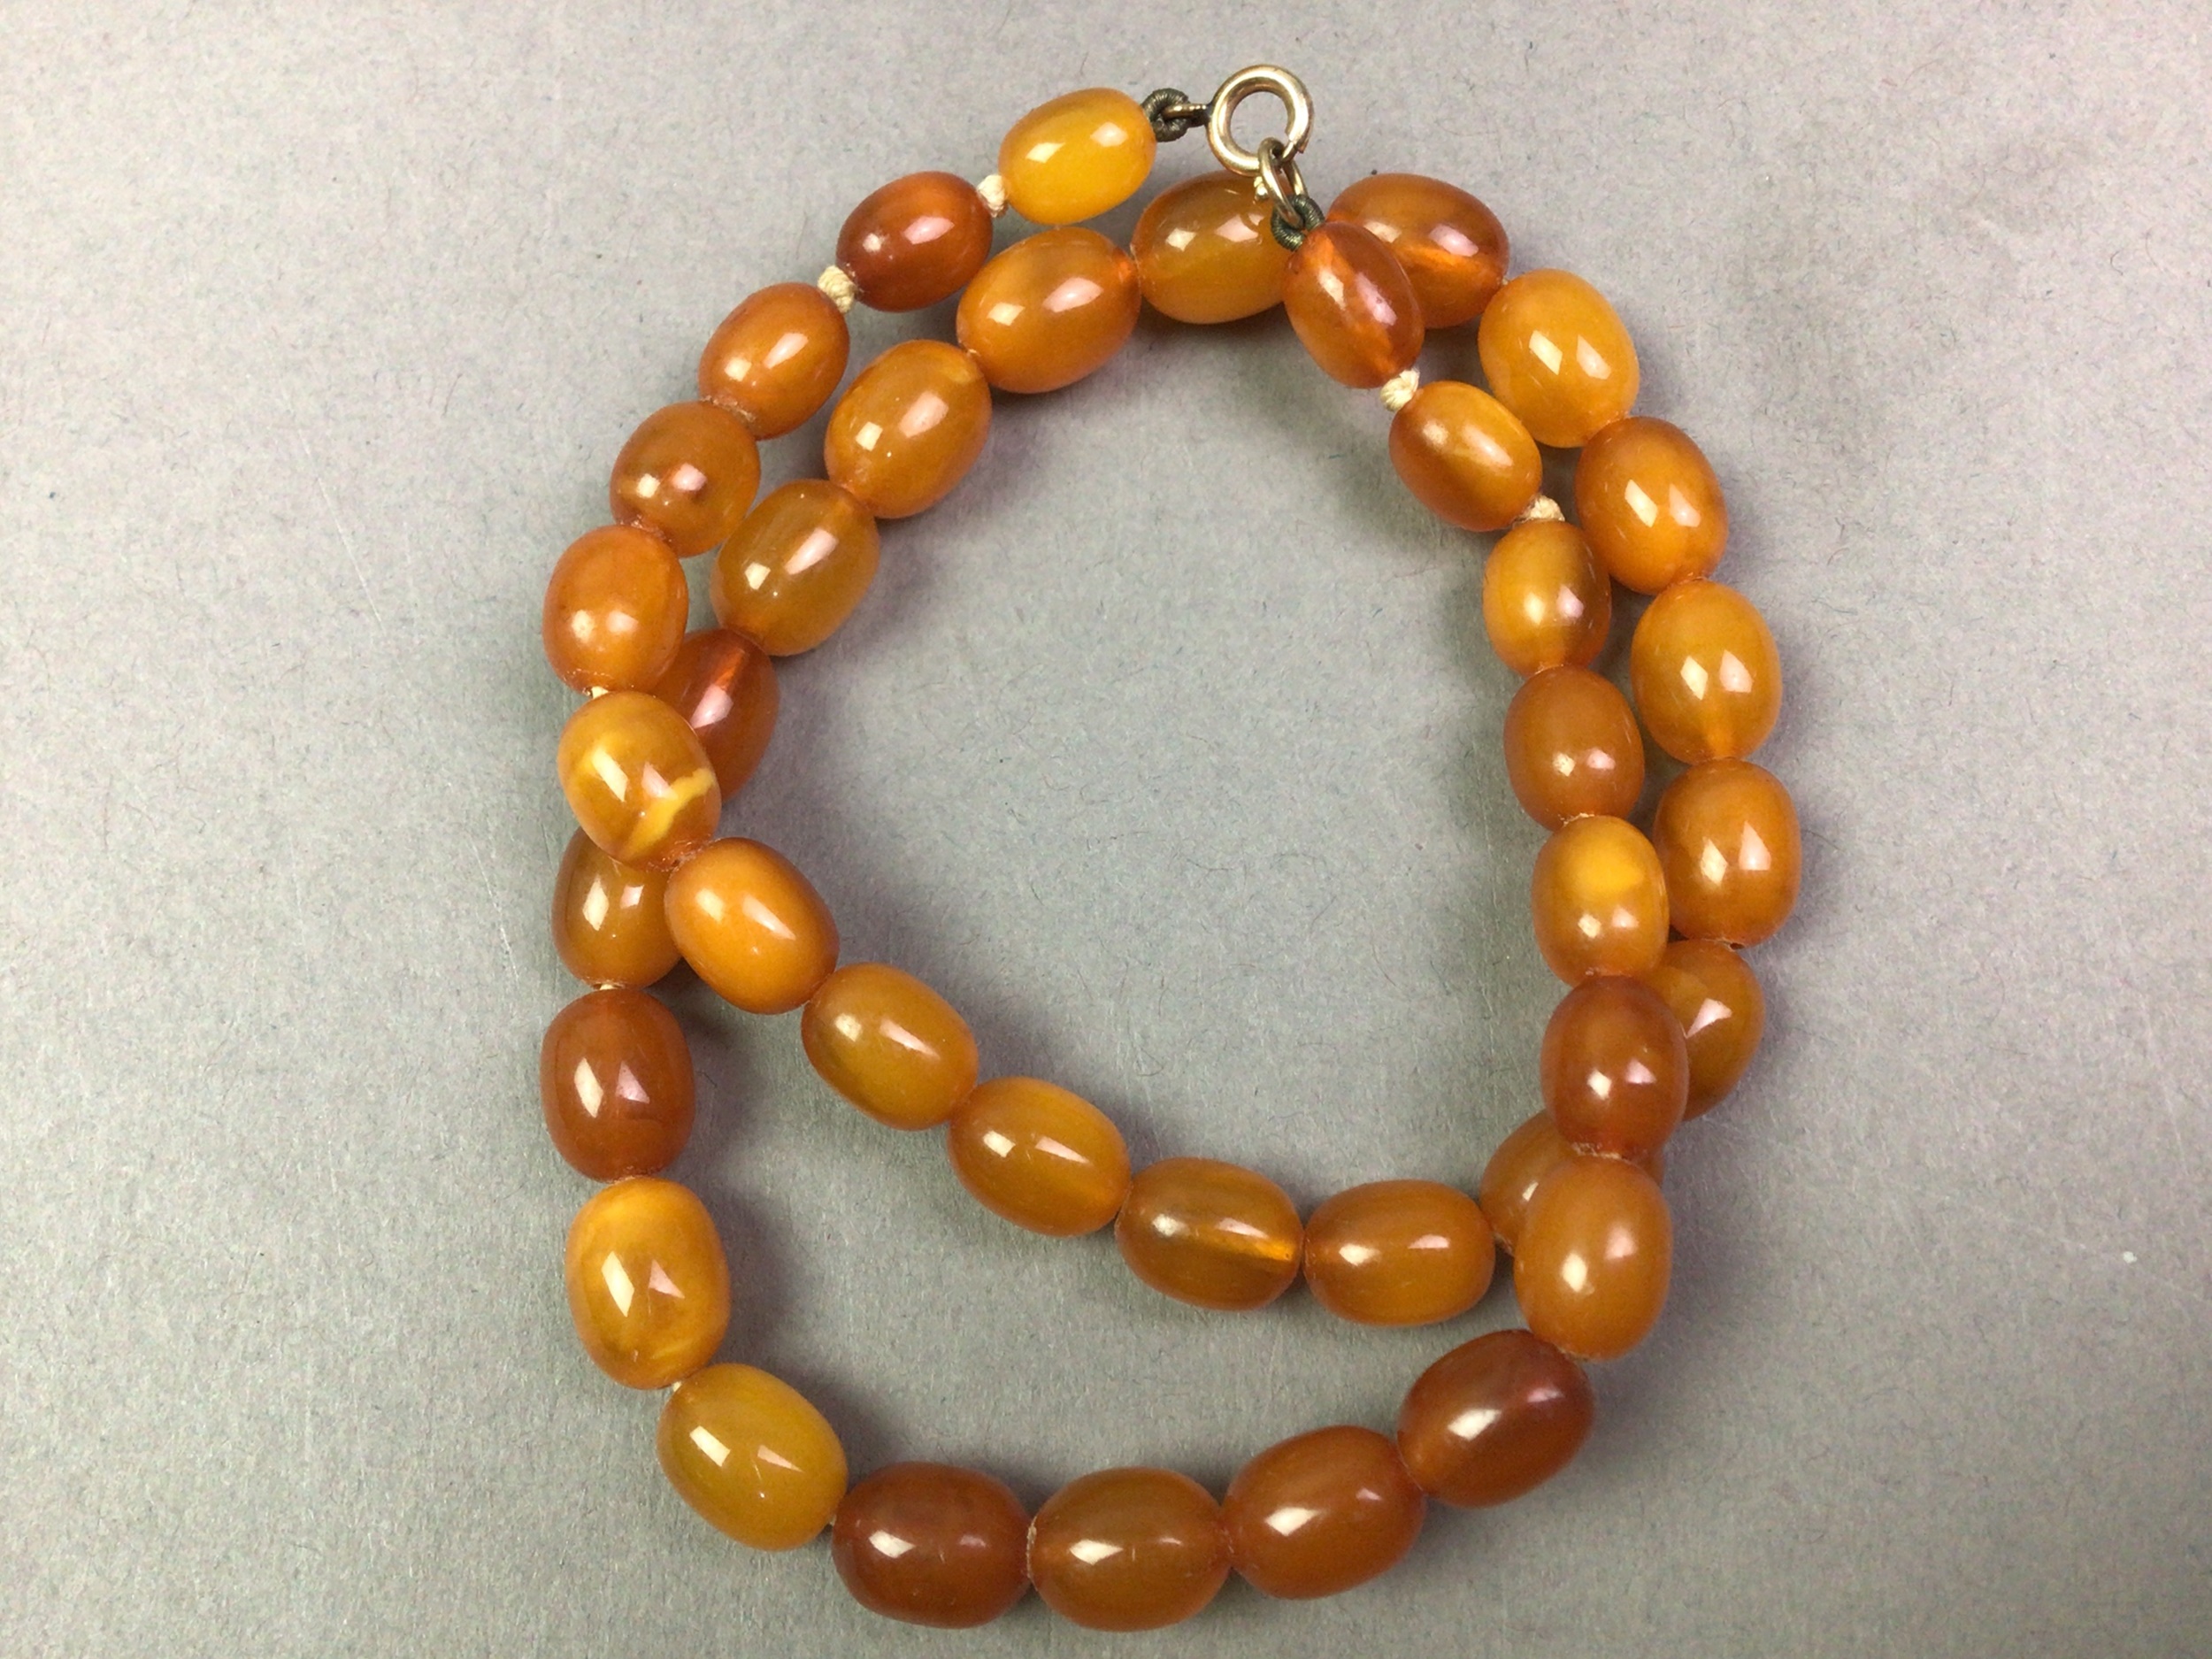 Amber Necklace Made of Free Form Shape Baltic Amber Beads.